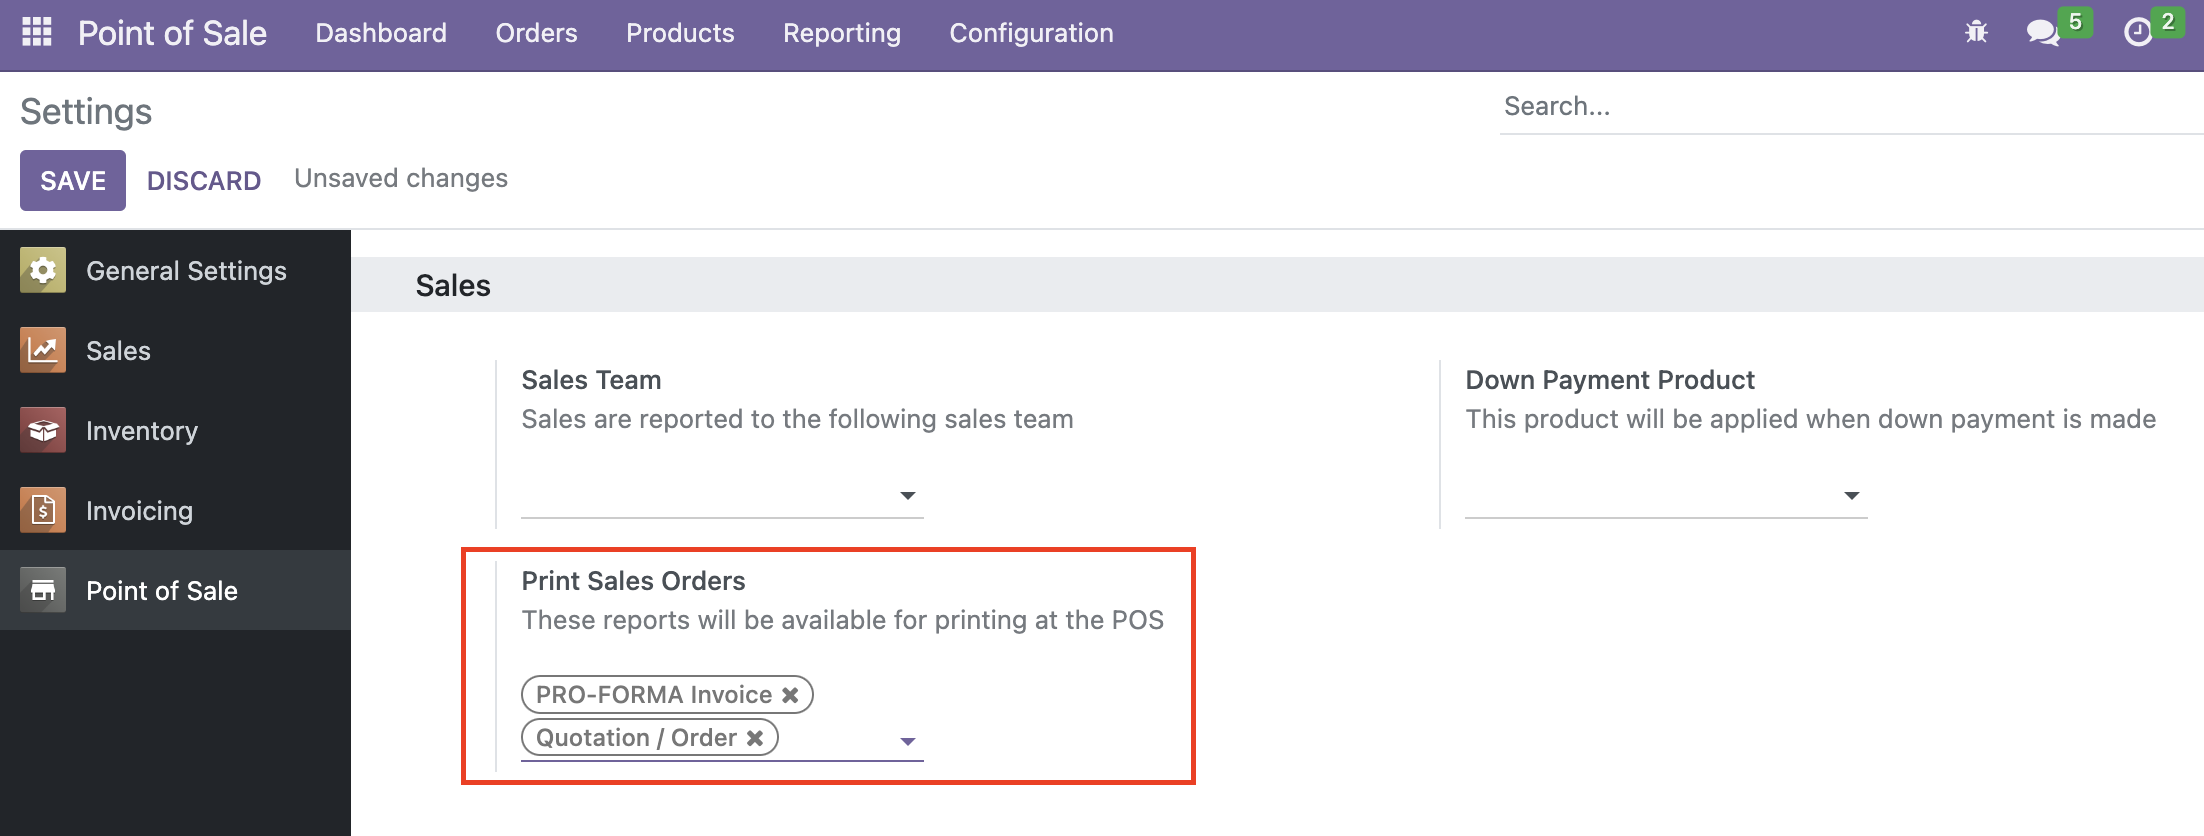 https://raw.githubusercontent.com/OCA/pos/16.0/pos_sale_order_print/static/img/pos_config.png